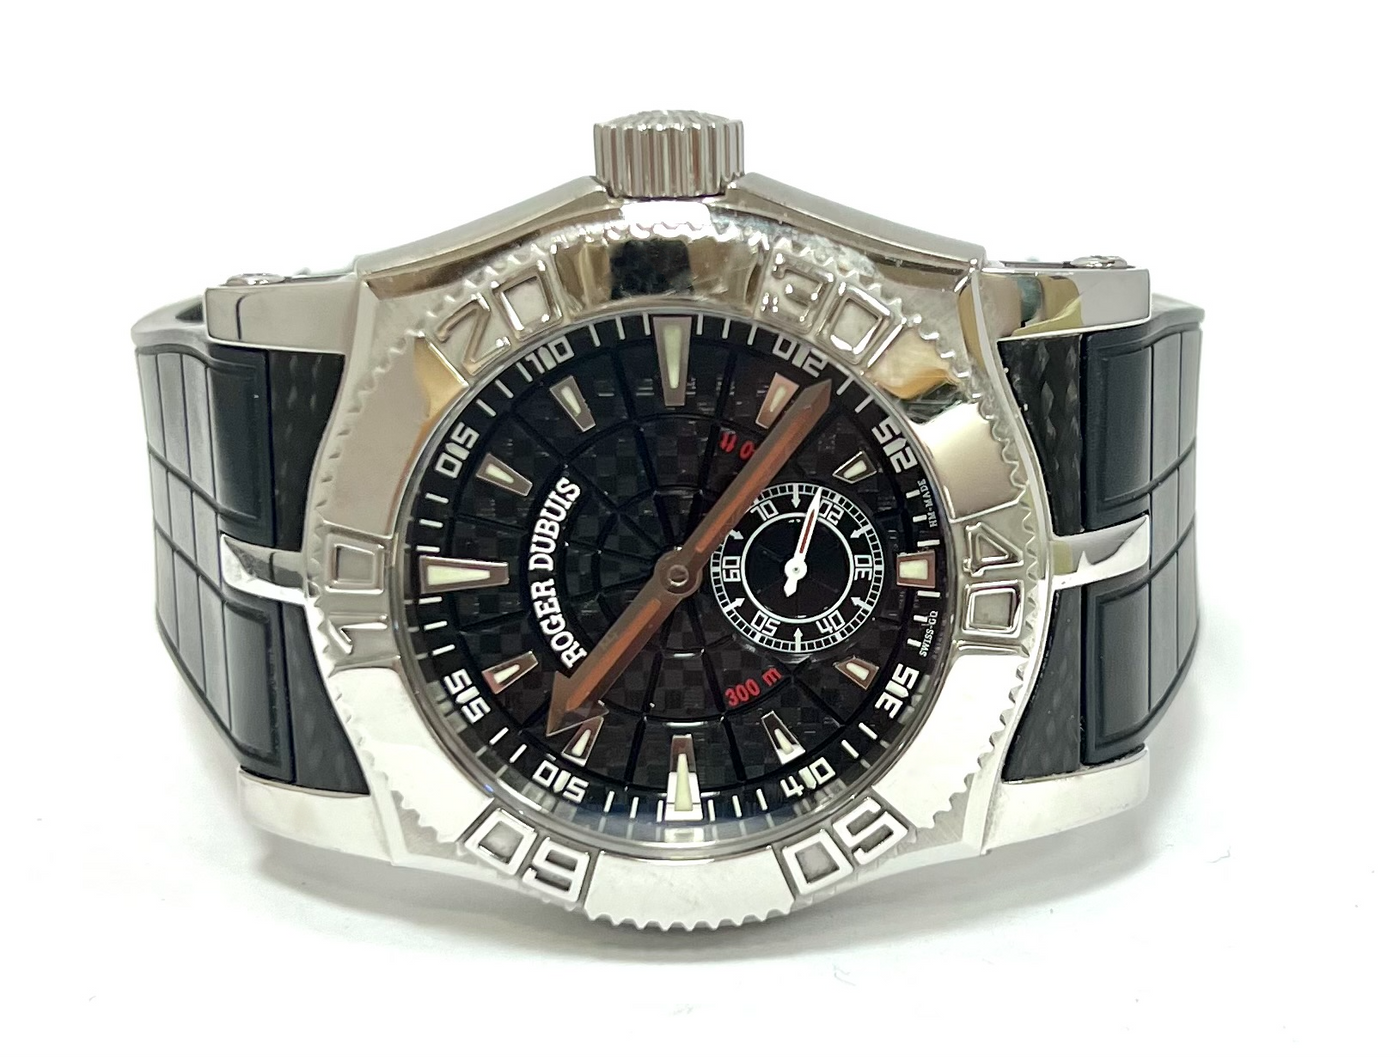 Roger Dubuis Easy Diver Stainless Steel 46mm Limited Edition